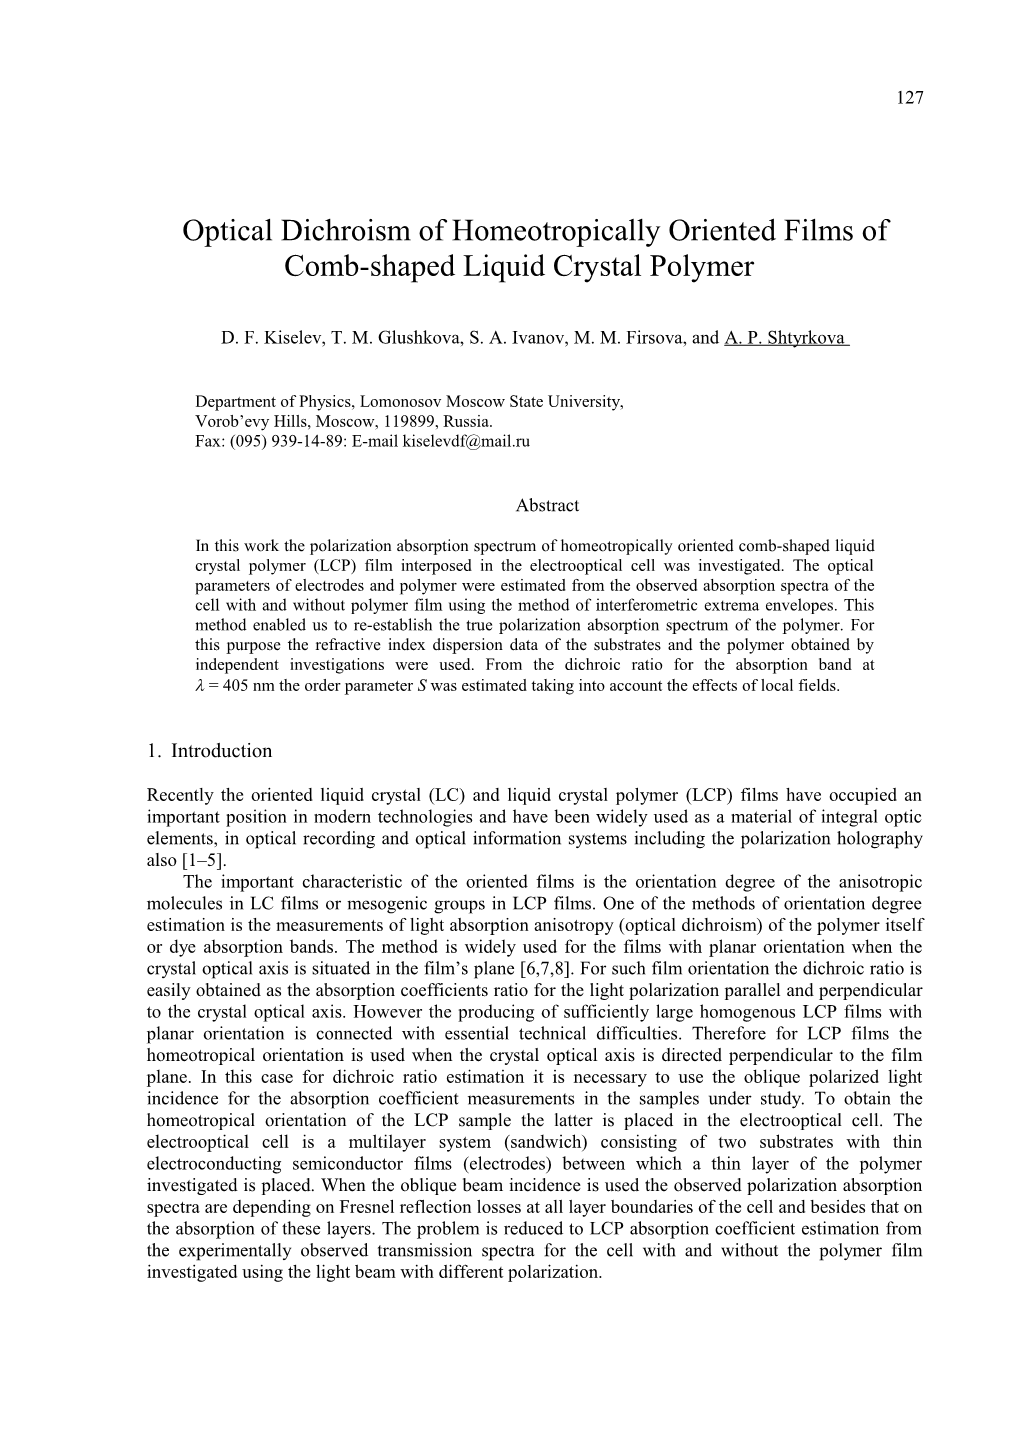 Optical Dichroism of Homeotropically Oriented Films of Comb-Shaped Liquid Crystal Polymer